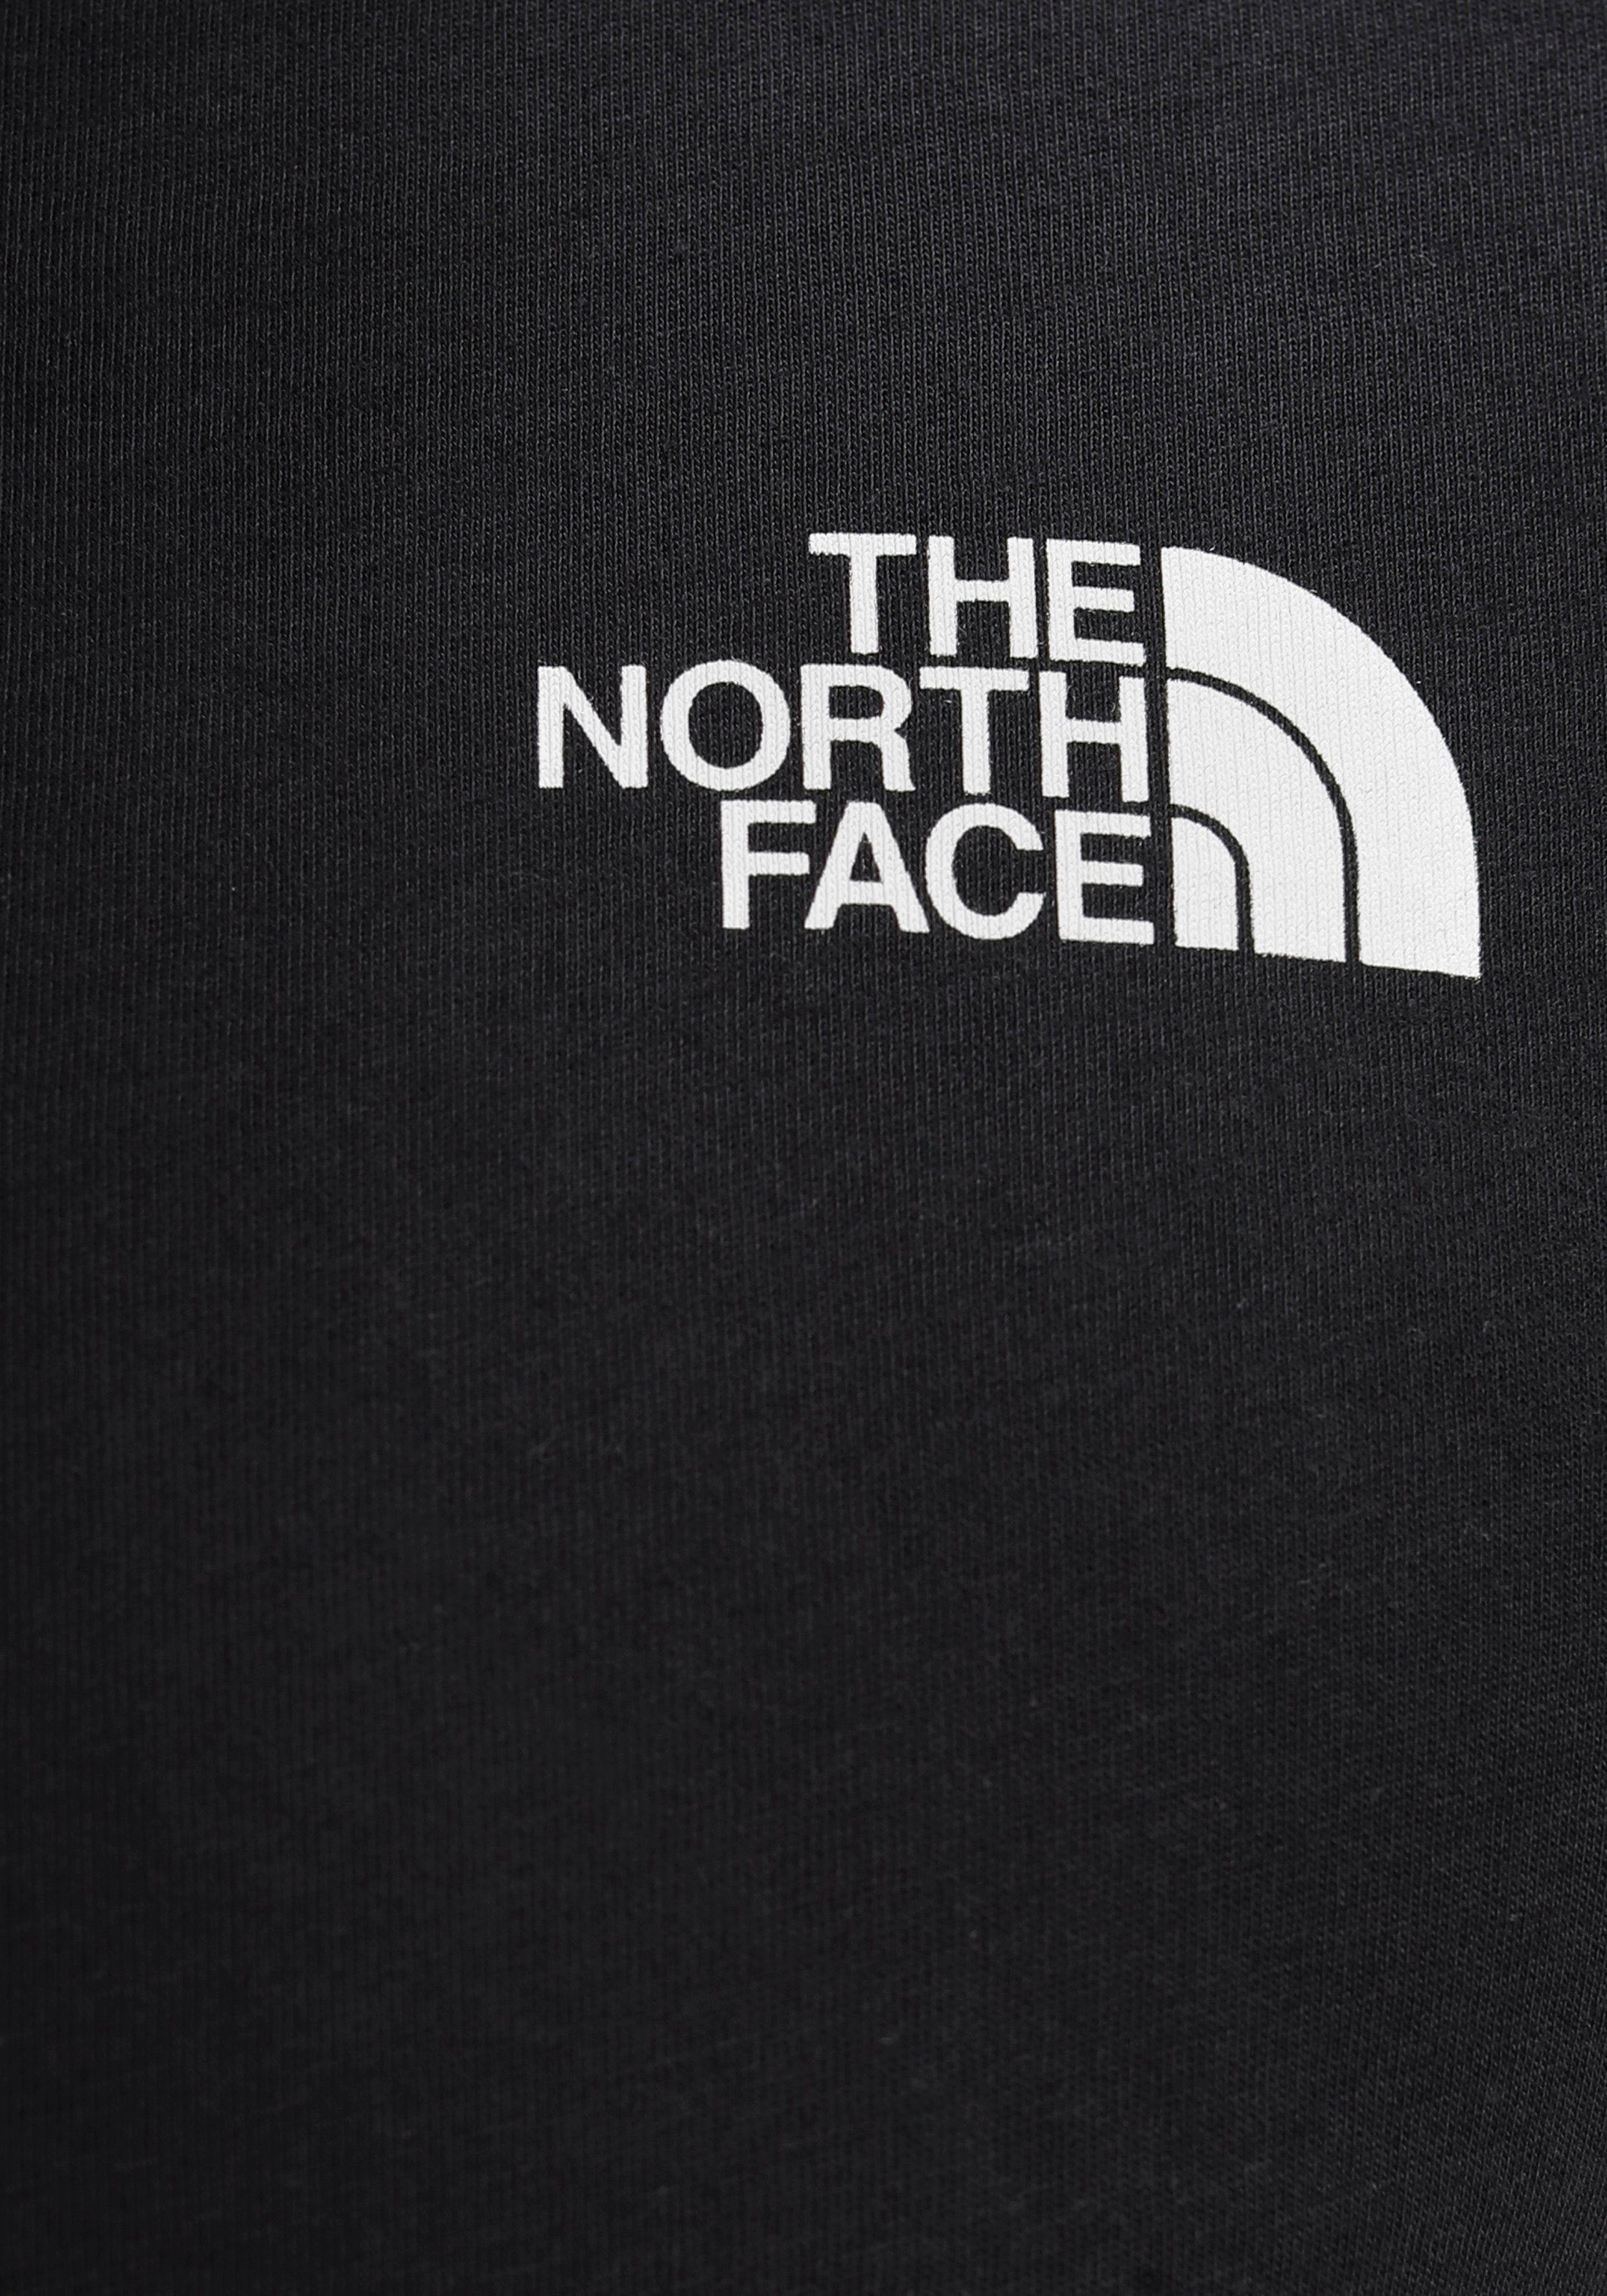 schwarz Funktionsshirt DOME Face The SIMPLE North